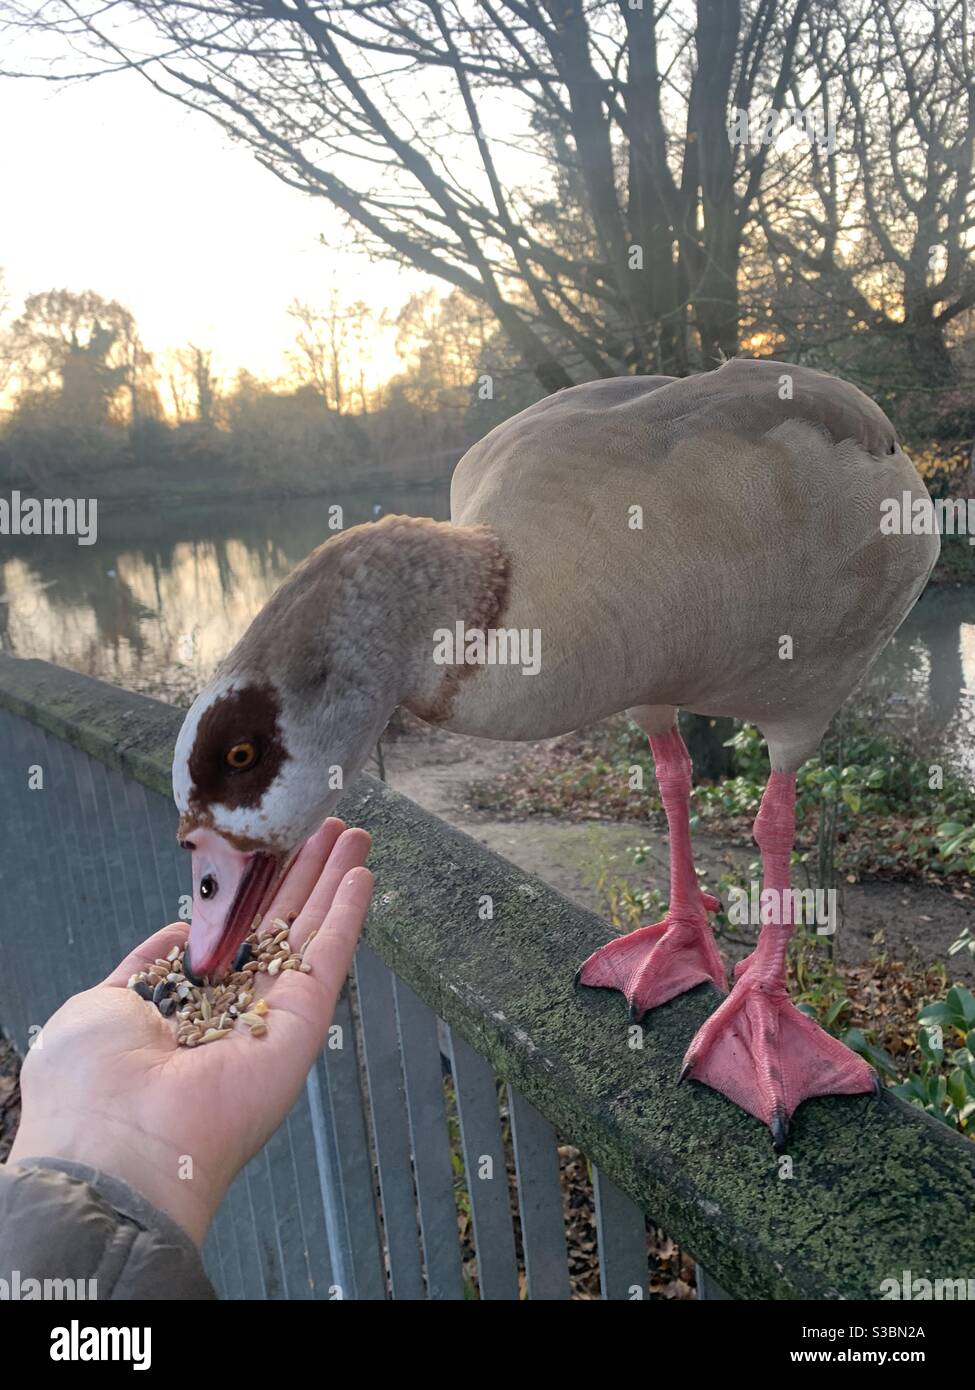 Hand with seed feeding Egyptian goose Stock Photo